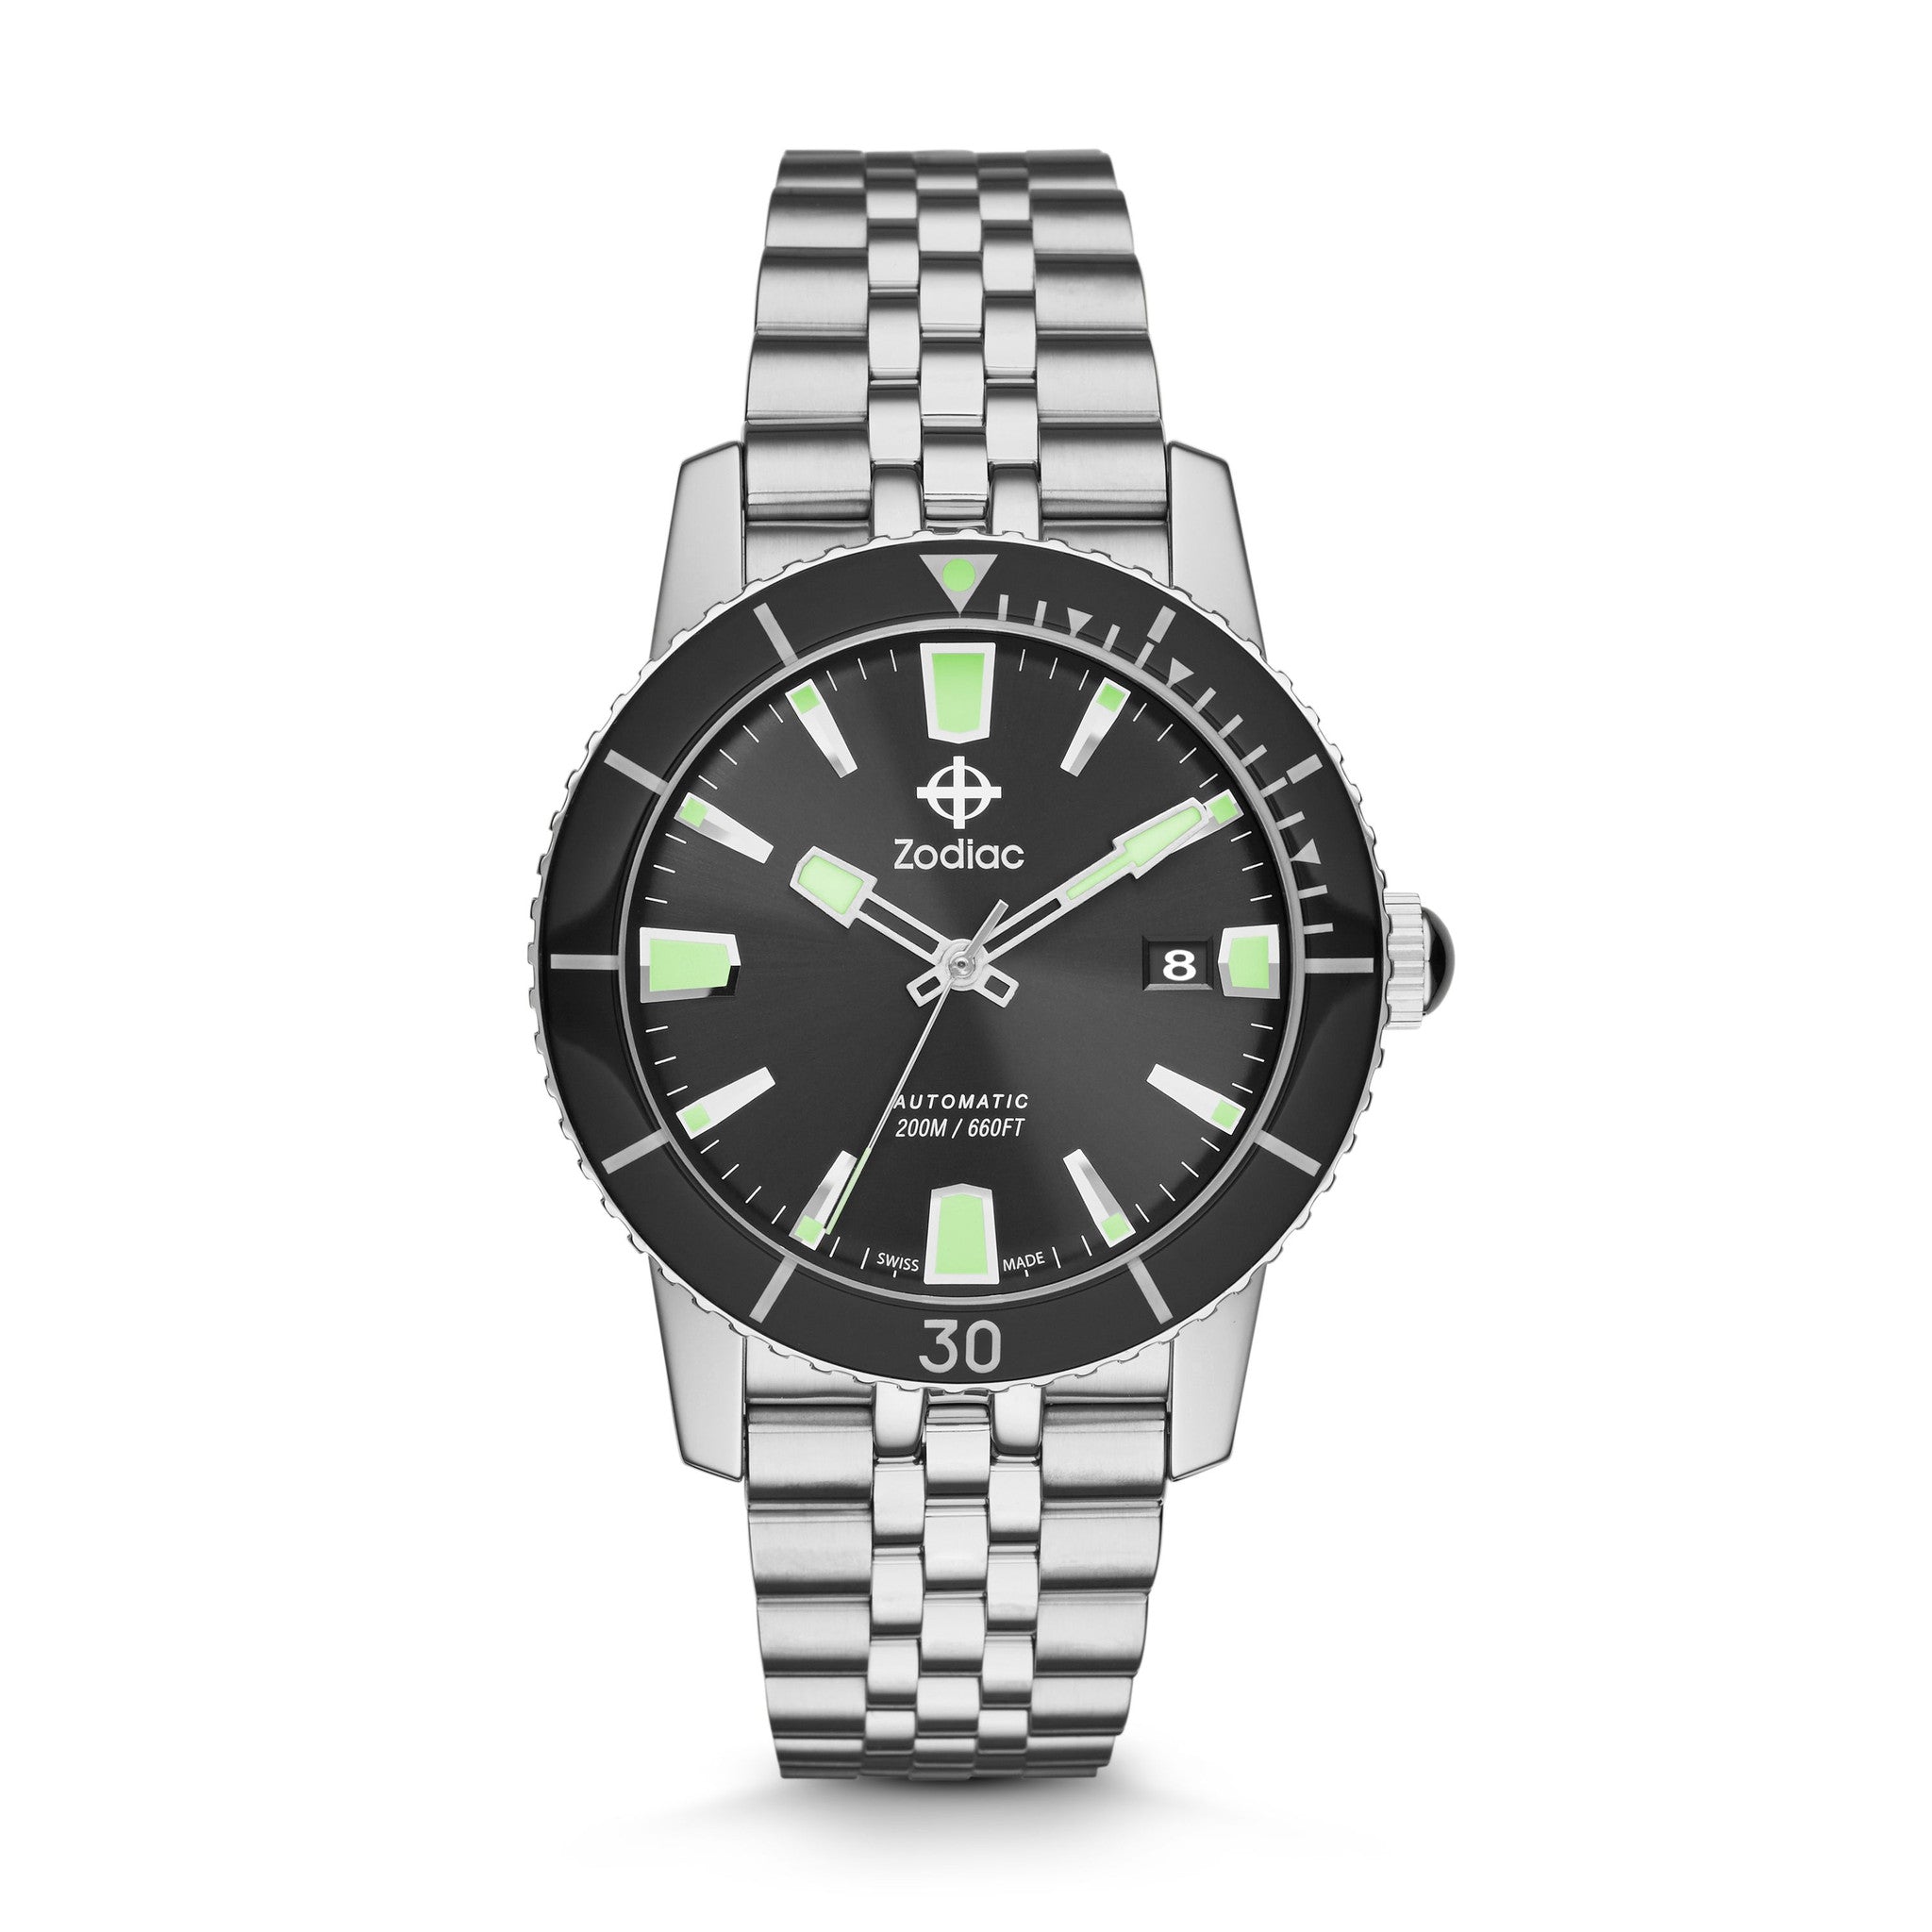 SUPER SEA WOLF 53 COMPRESSION AUTOMATIC STAINLESS STEEL WATCH Ã¢ Zodiac  Watches